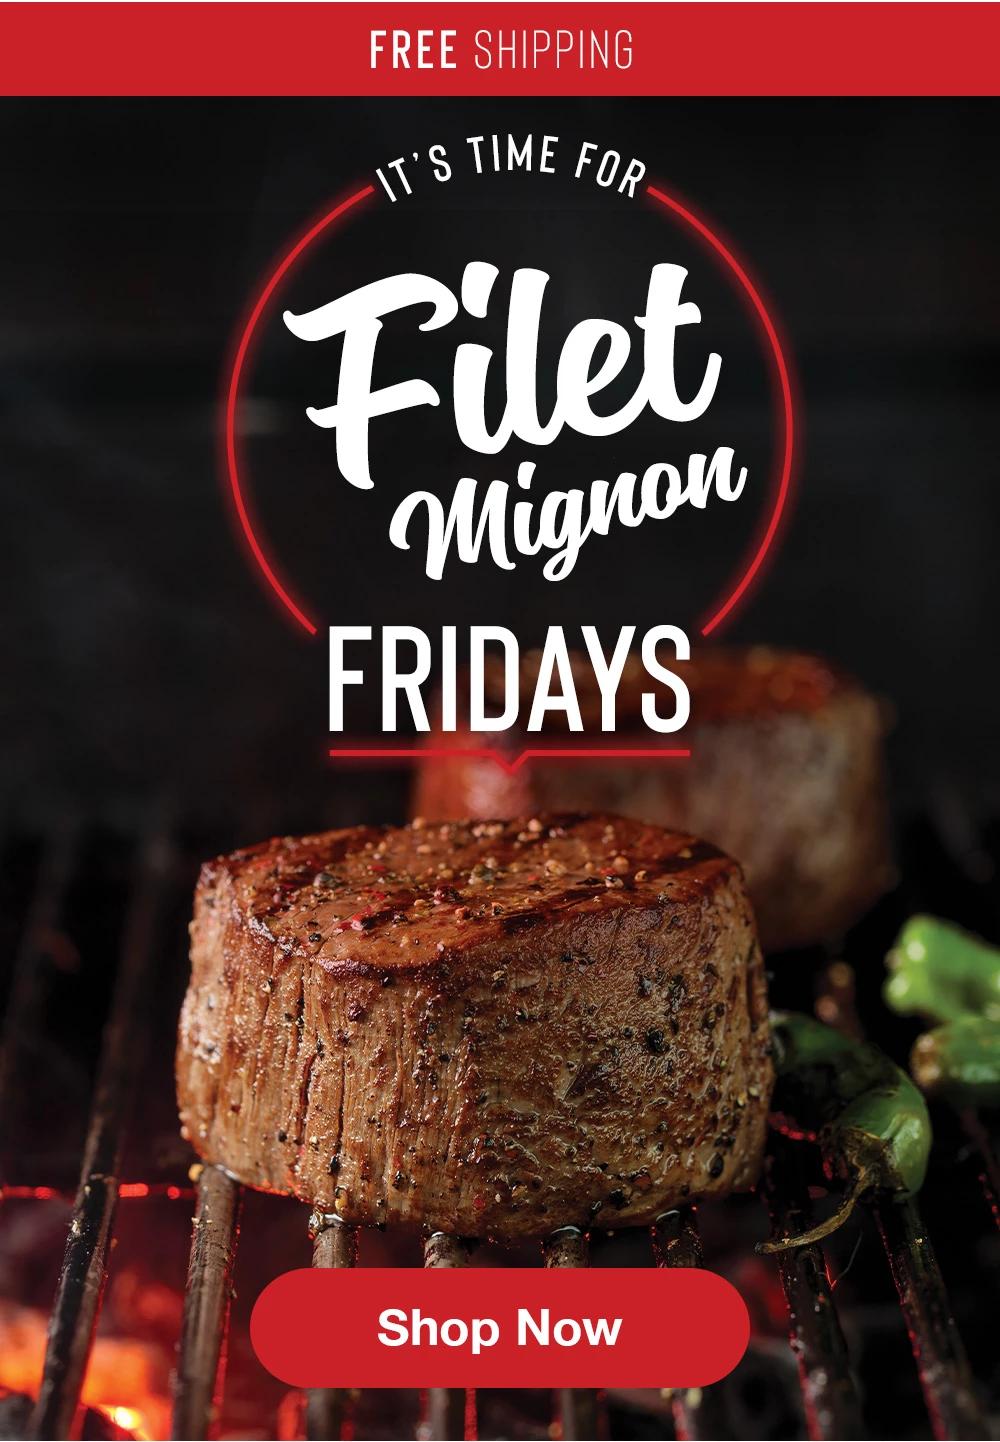 FREE SHIPPING | IT'S TIME FOR Filet Mignon FRIDAYS || Shop Now